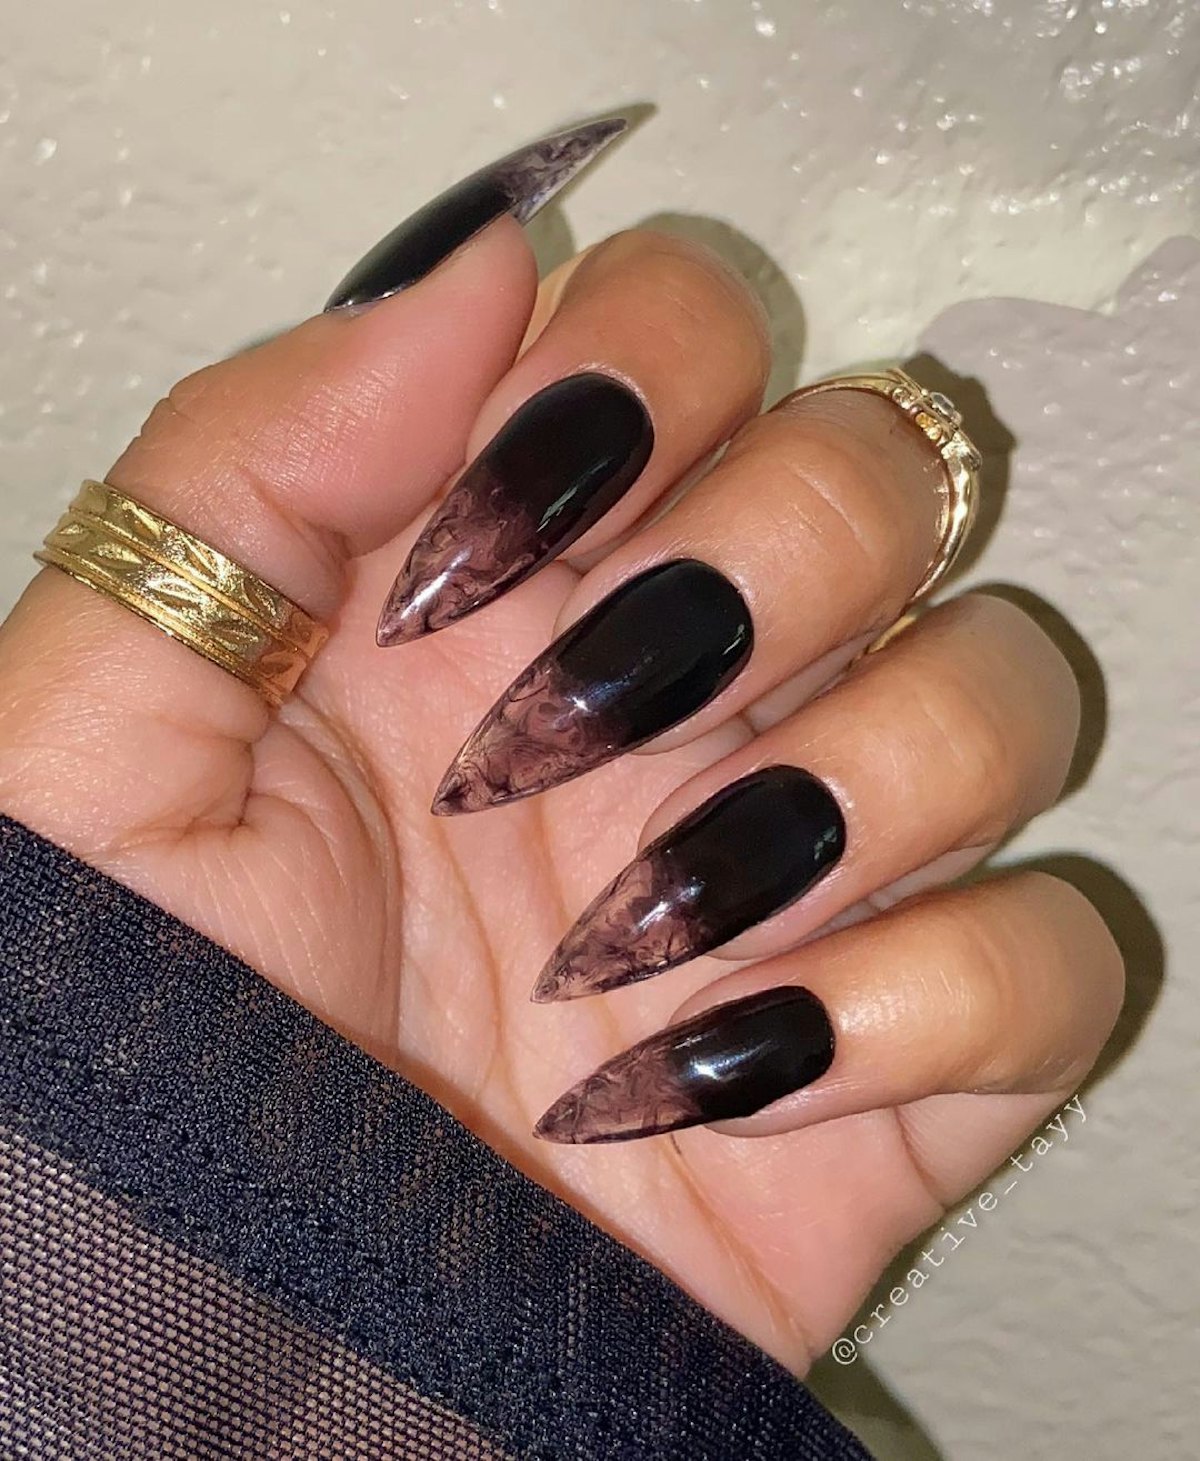 Here is the best manicure inspiration for celebrating scorpio season with nail art in 2022. These bl...